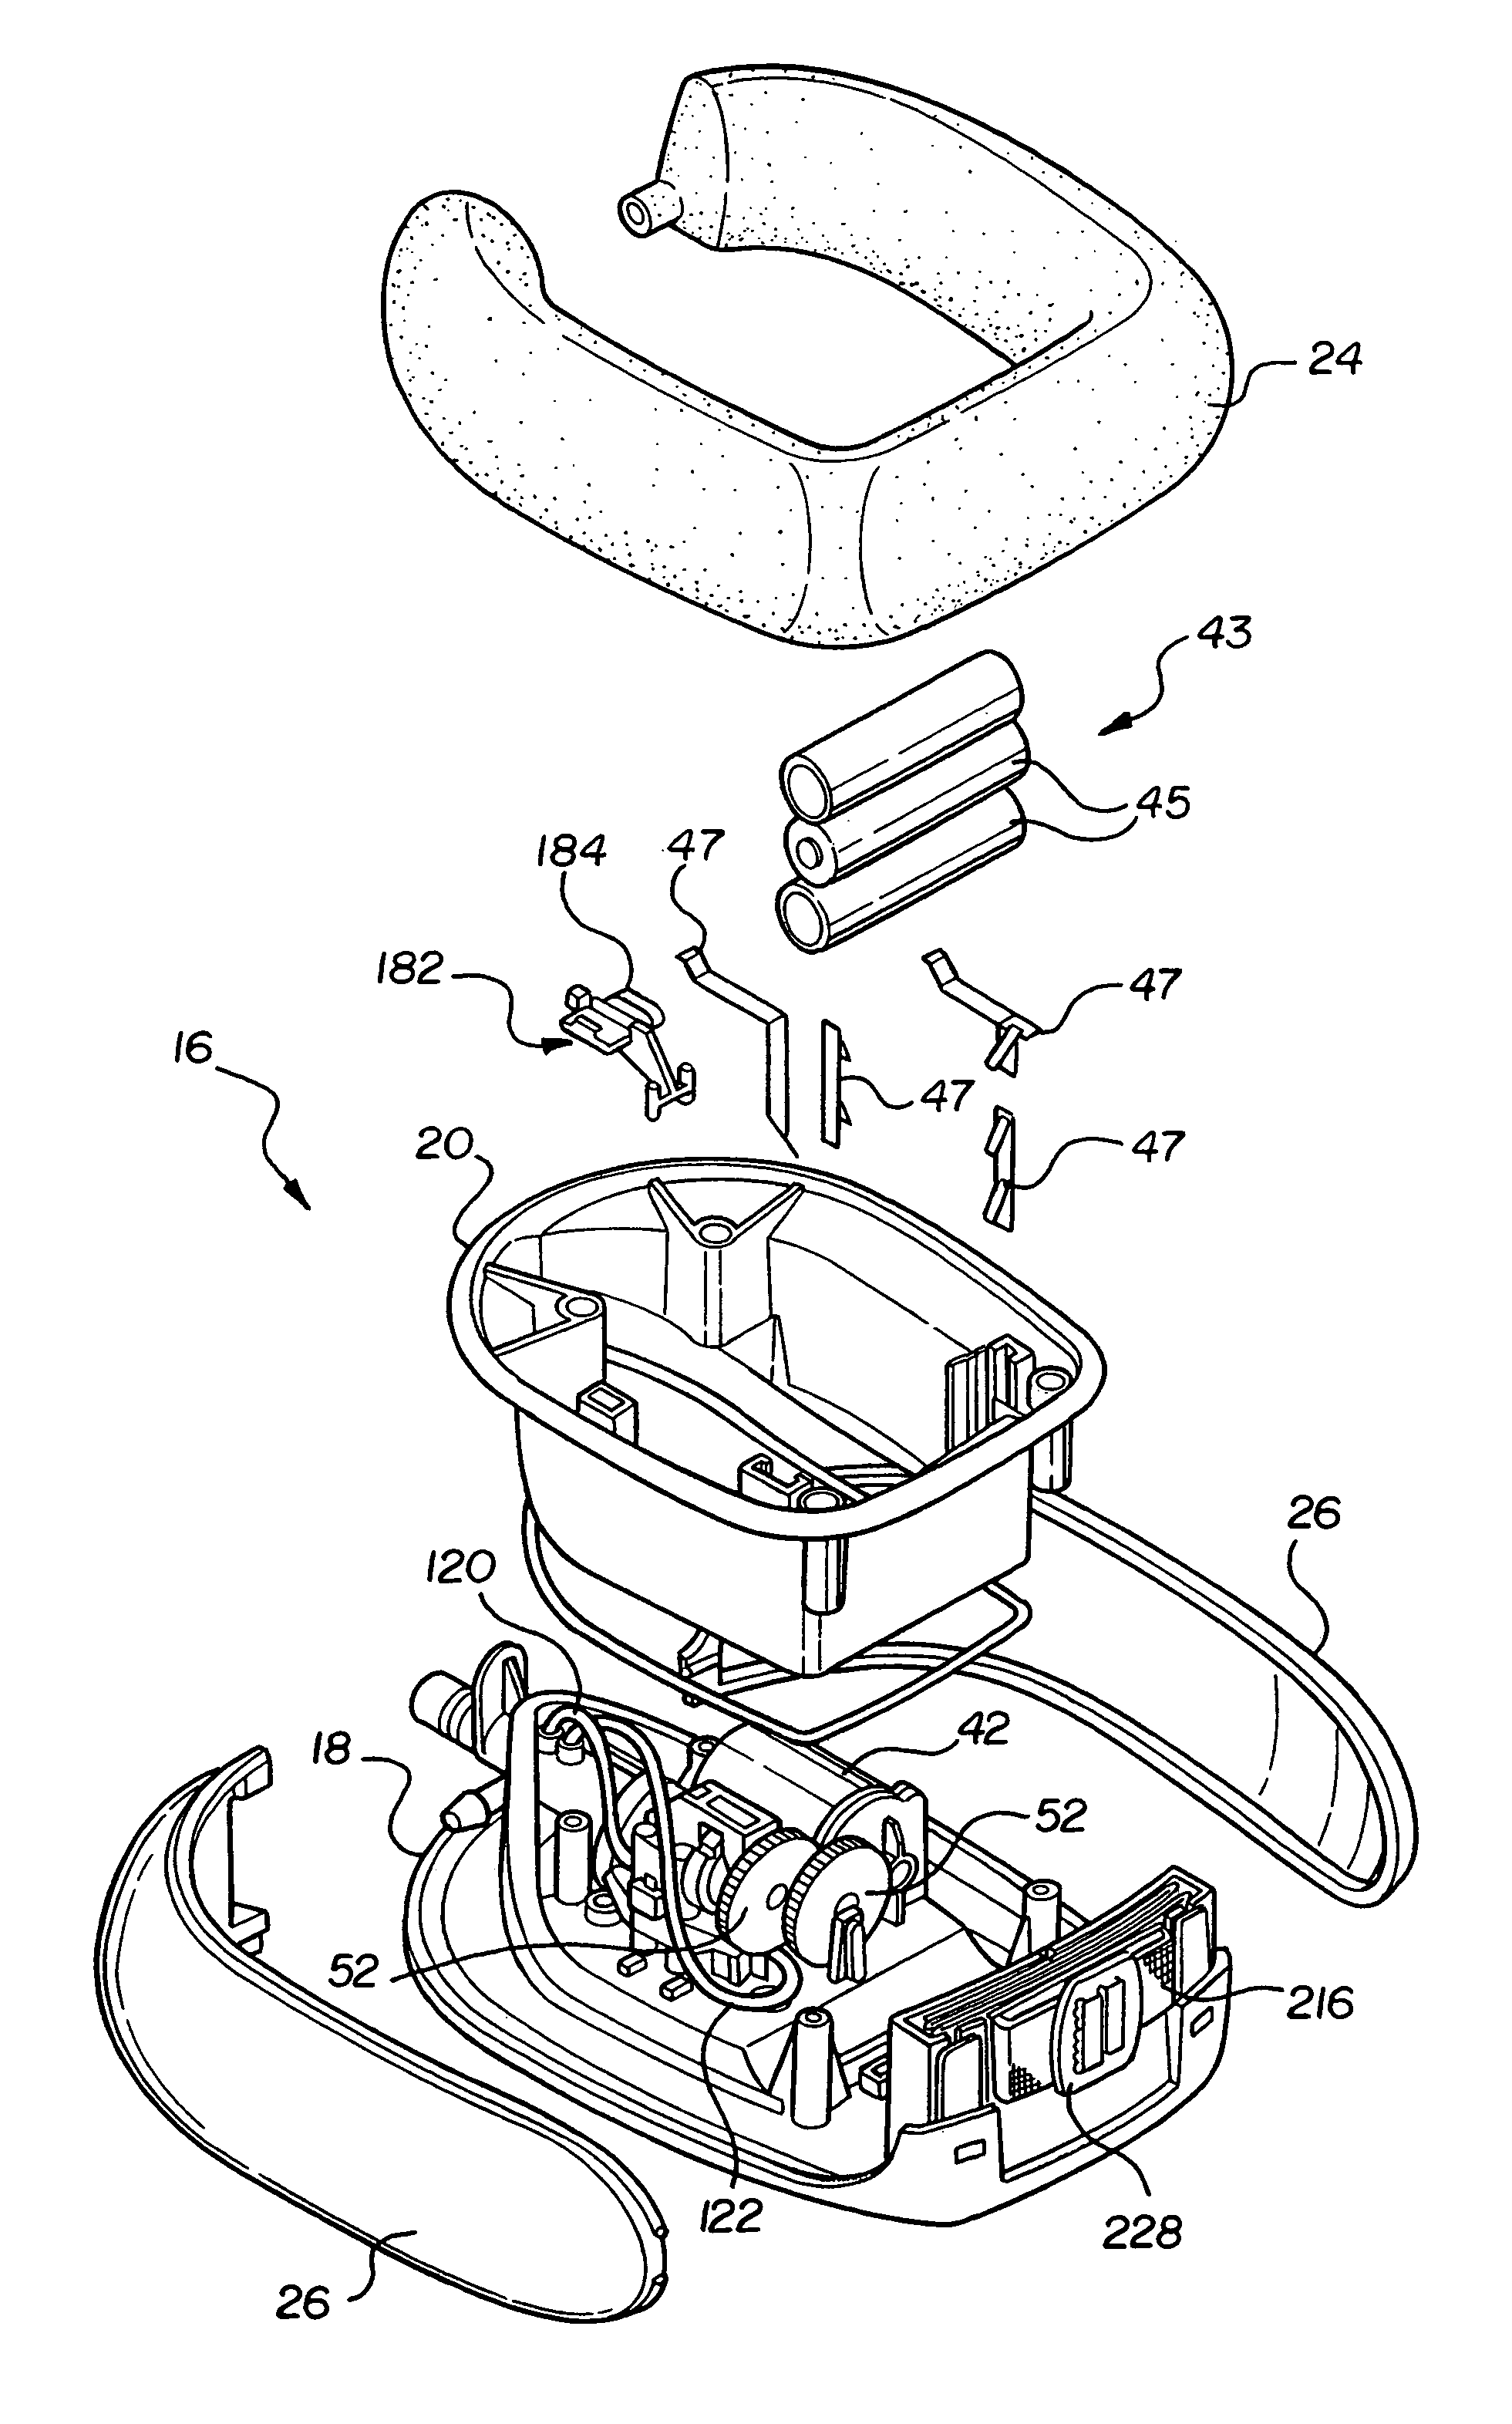 Pump assembly for an integrated medication delivery system